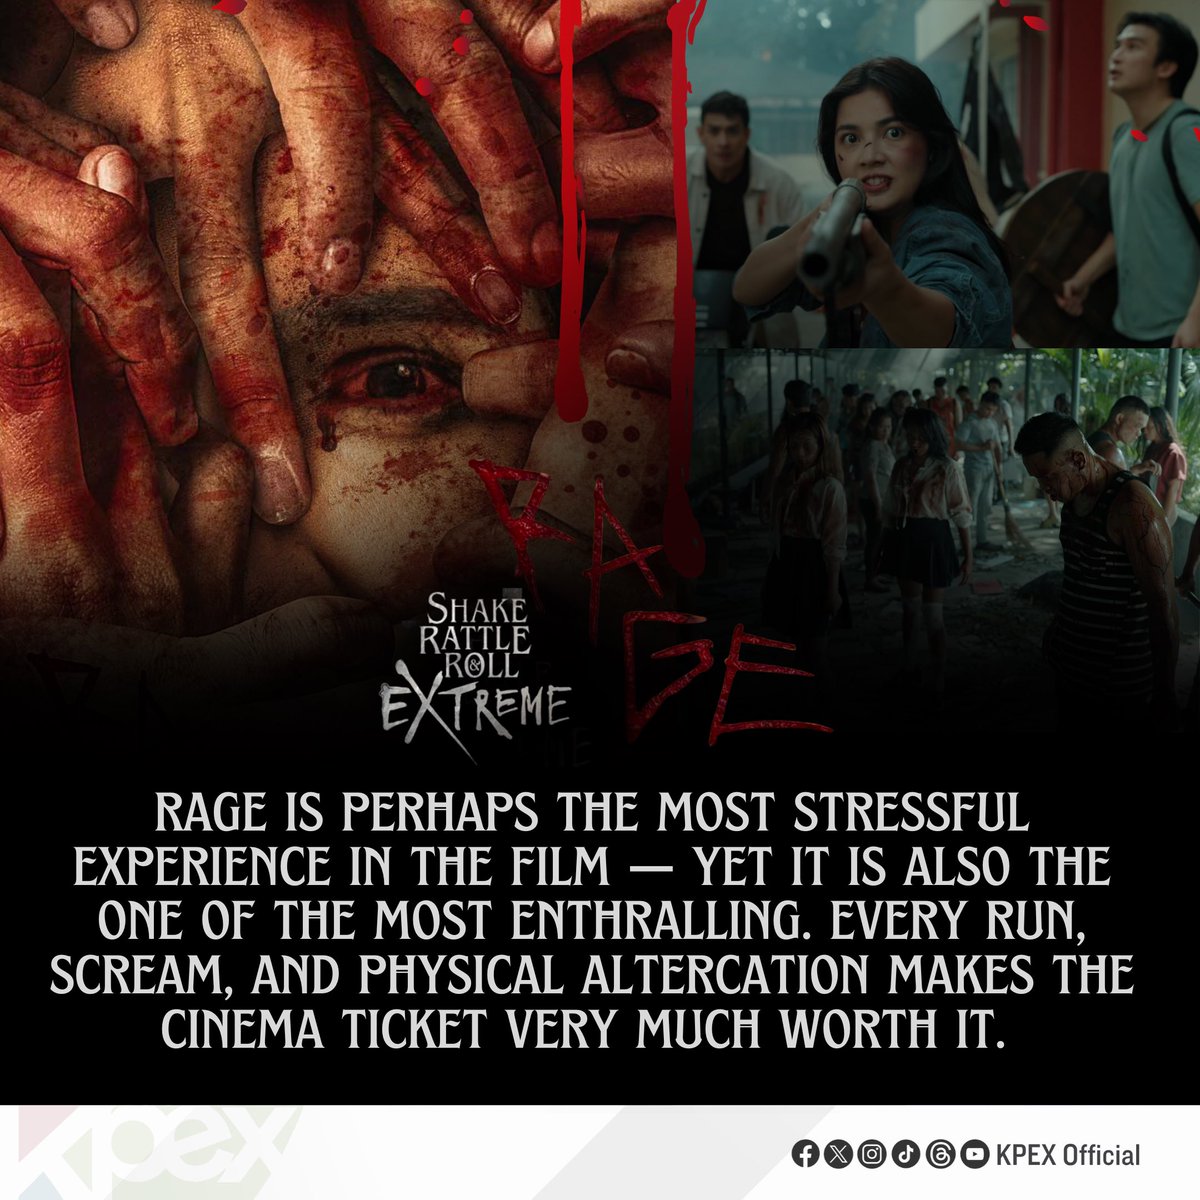 SRR EPISODE REVIEW: RAGE Zombies are not necessarily new to our consciousness, yet the thrill of watching them remains at an extreme level. Rage refamiliarizes its viewers with the zombie concept as it situates the conflict in the local town context. Furthermore, it serves as an